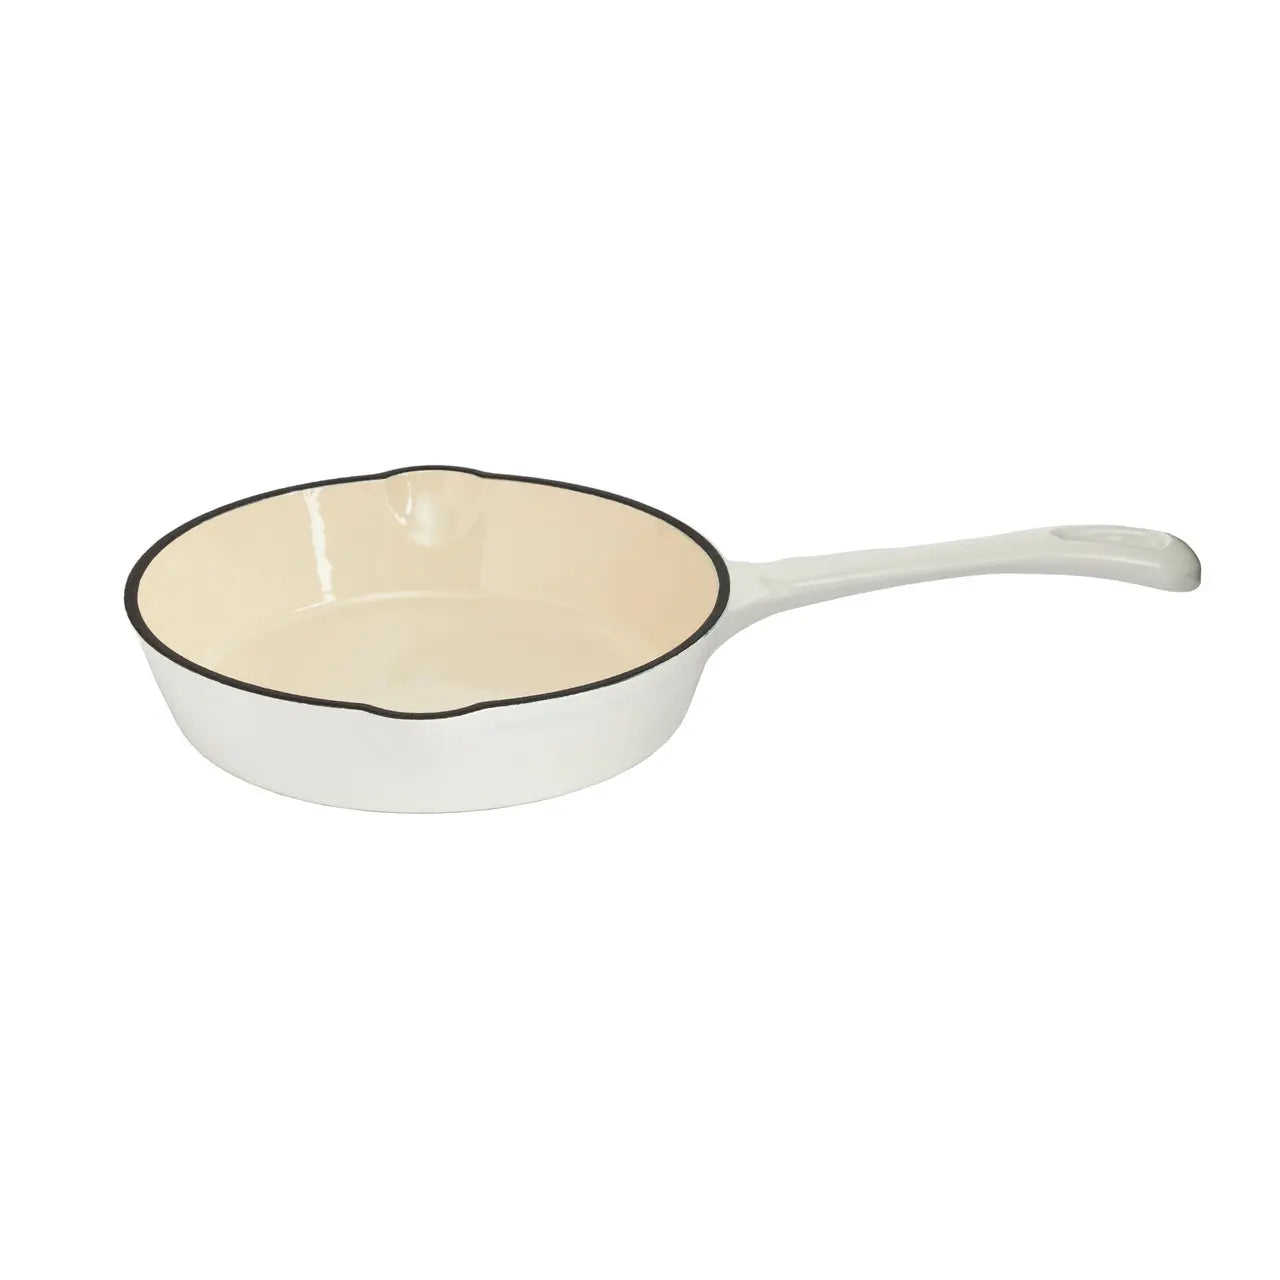 Enameled Cast iron 8 inch Skillet in White